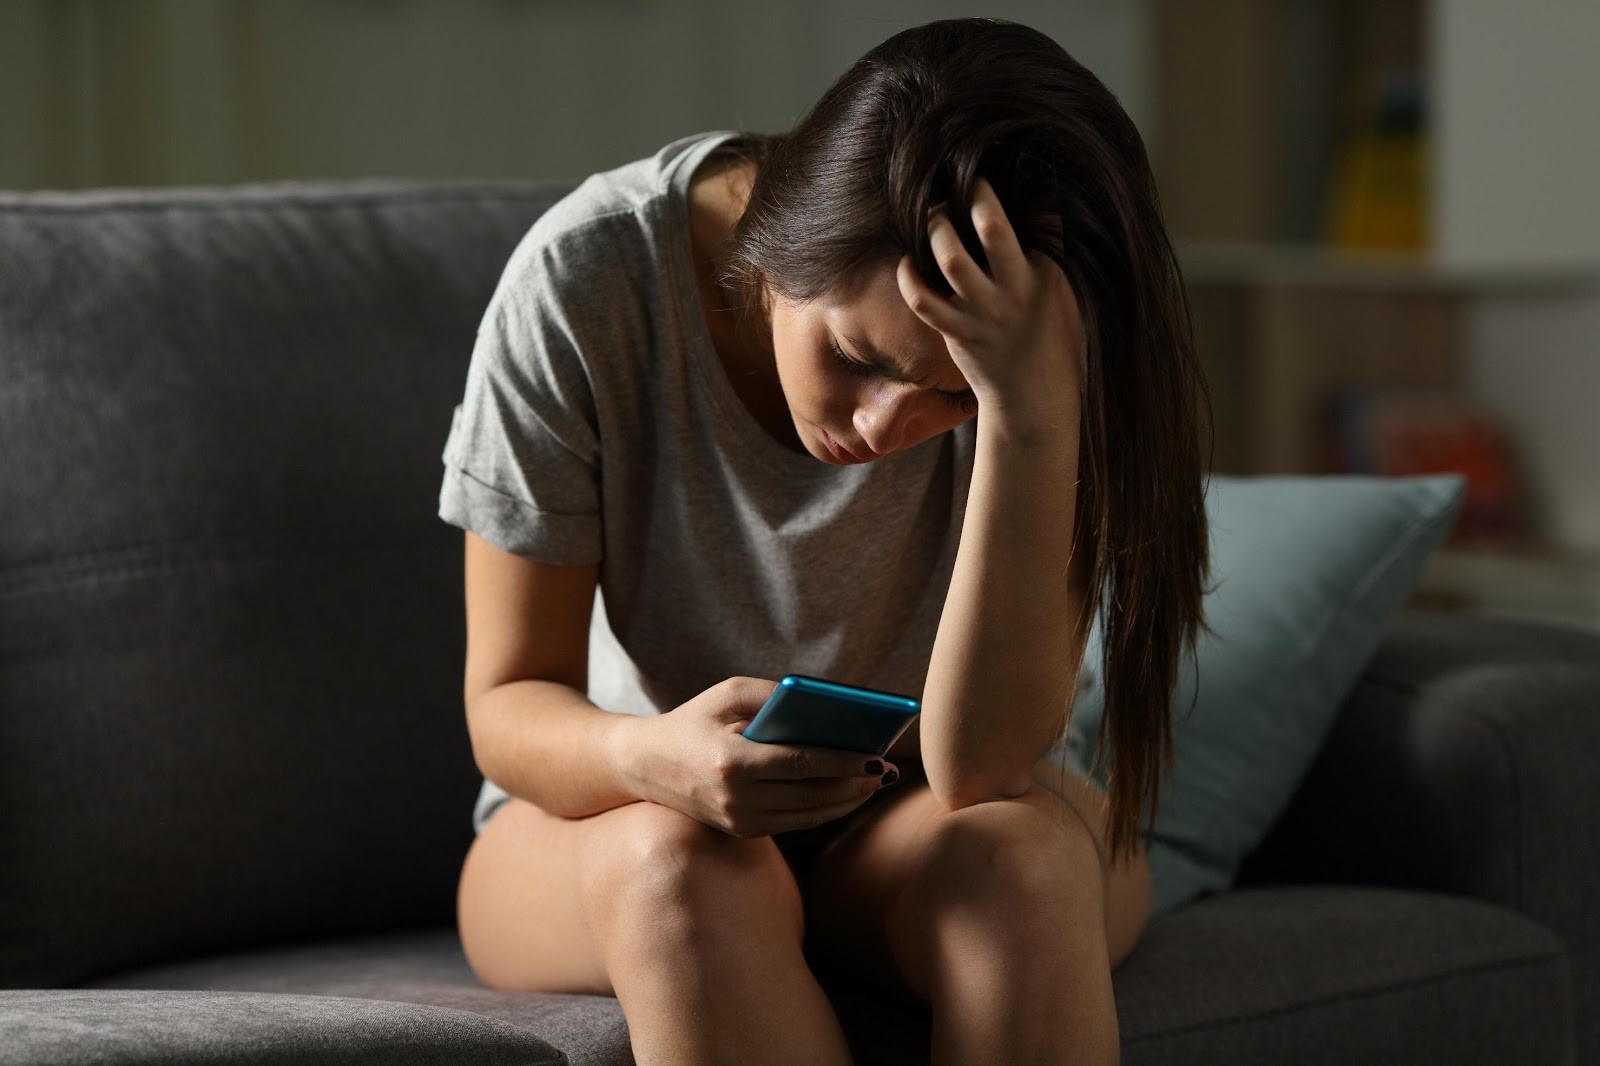 Teens Coping with COVID FOMO